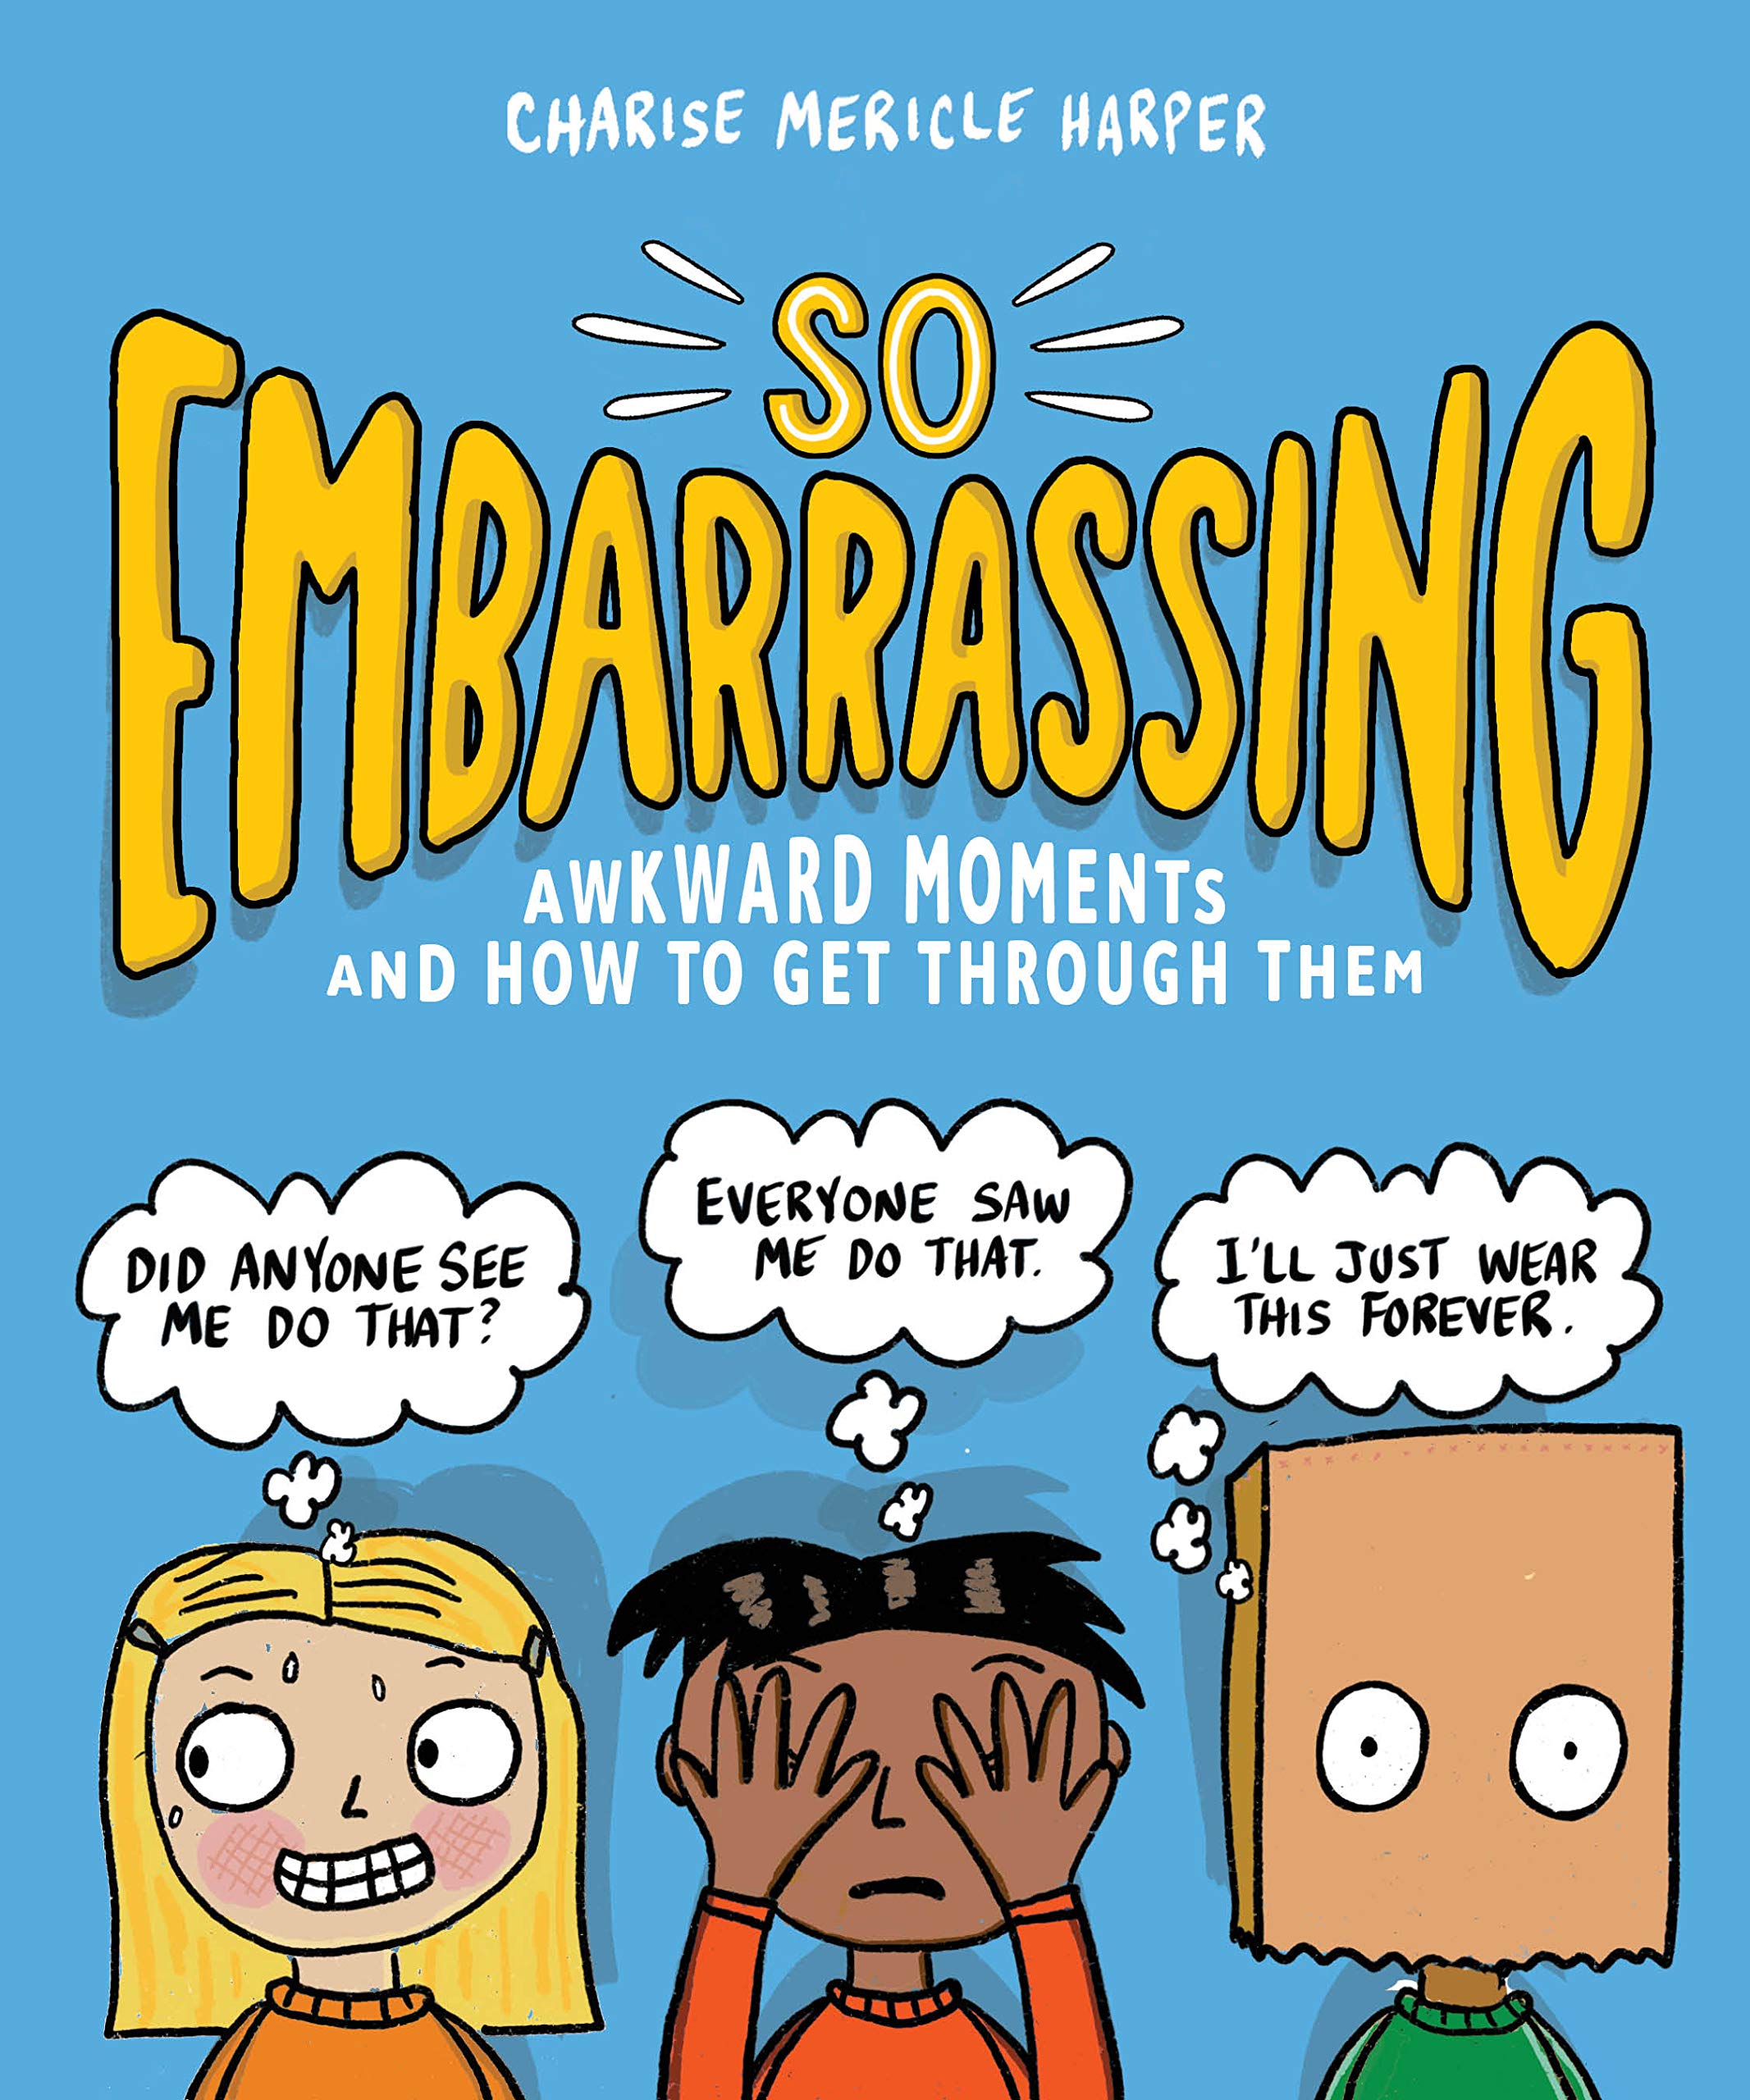 So Embarrassing: Awkward Moments and How To Get Through Them